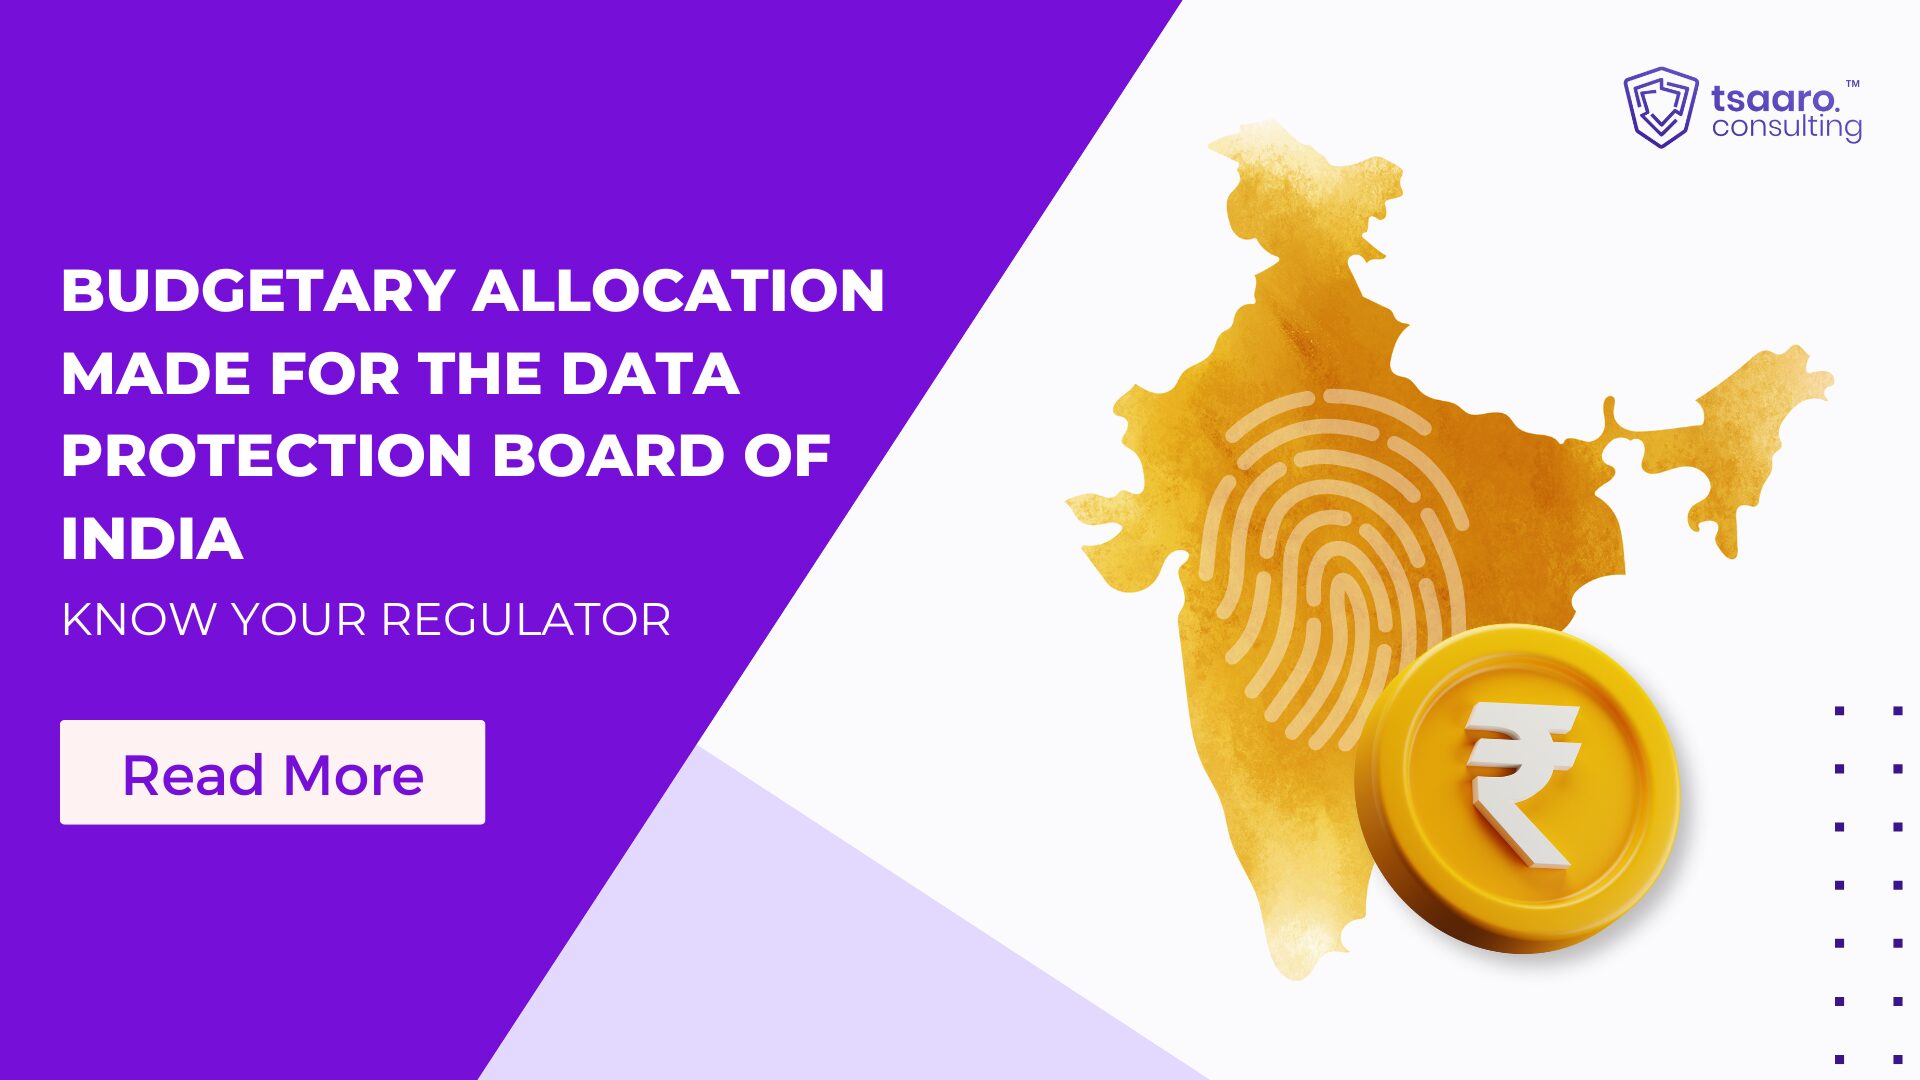 Budgetary Allocation Made for the Data Protection Board of India